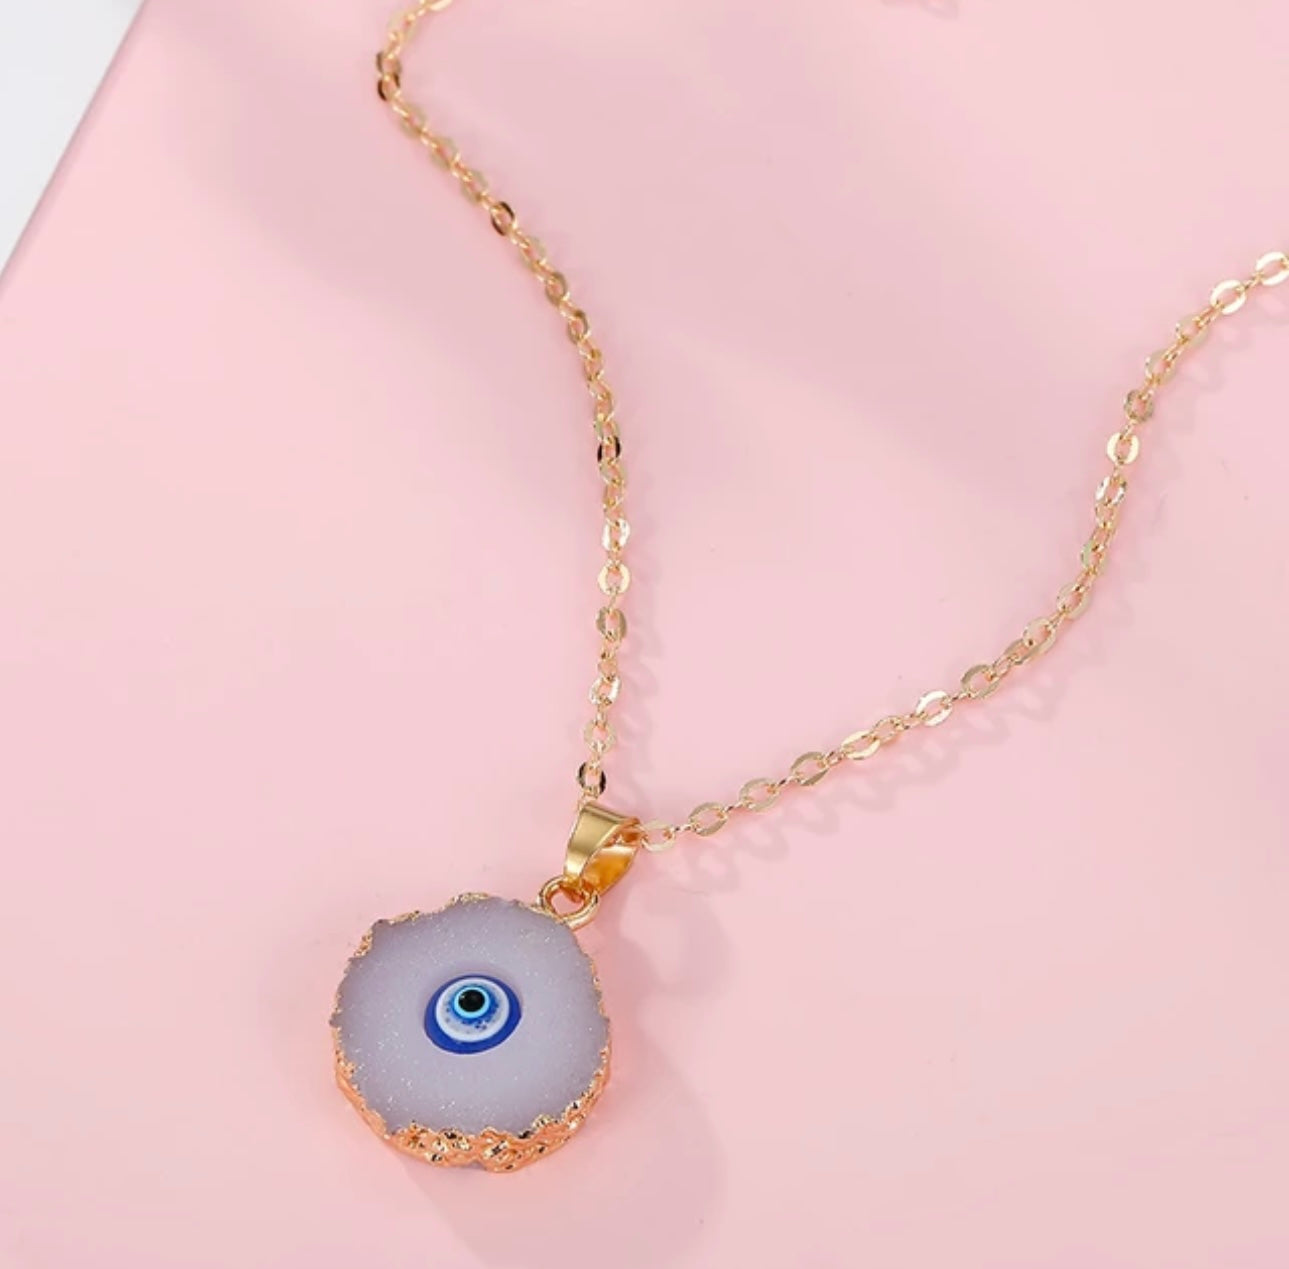 Evil Eye Stone Necklace - Good Luck & Protection